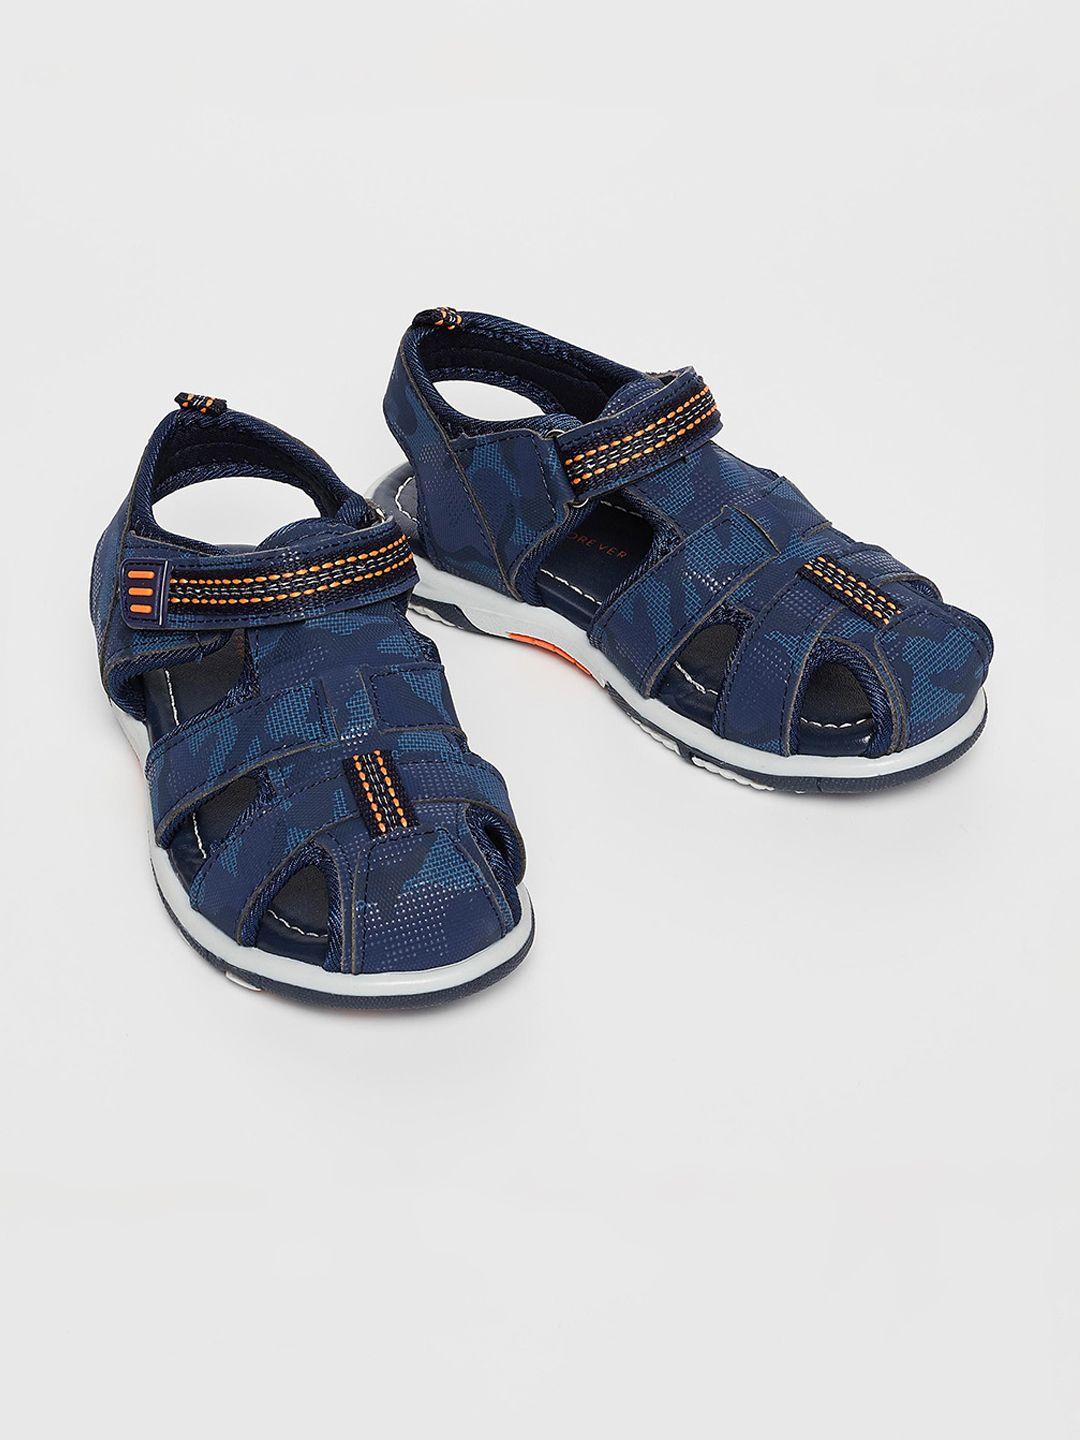 fame-forever-by-lifestyle-boys-navy-blue-sandals